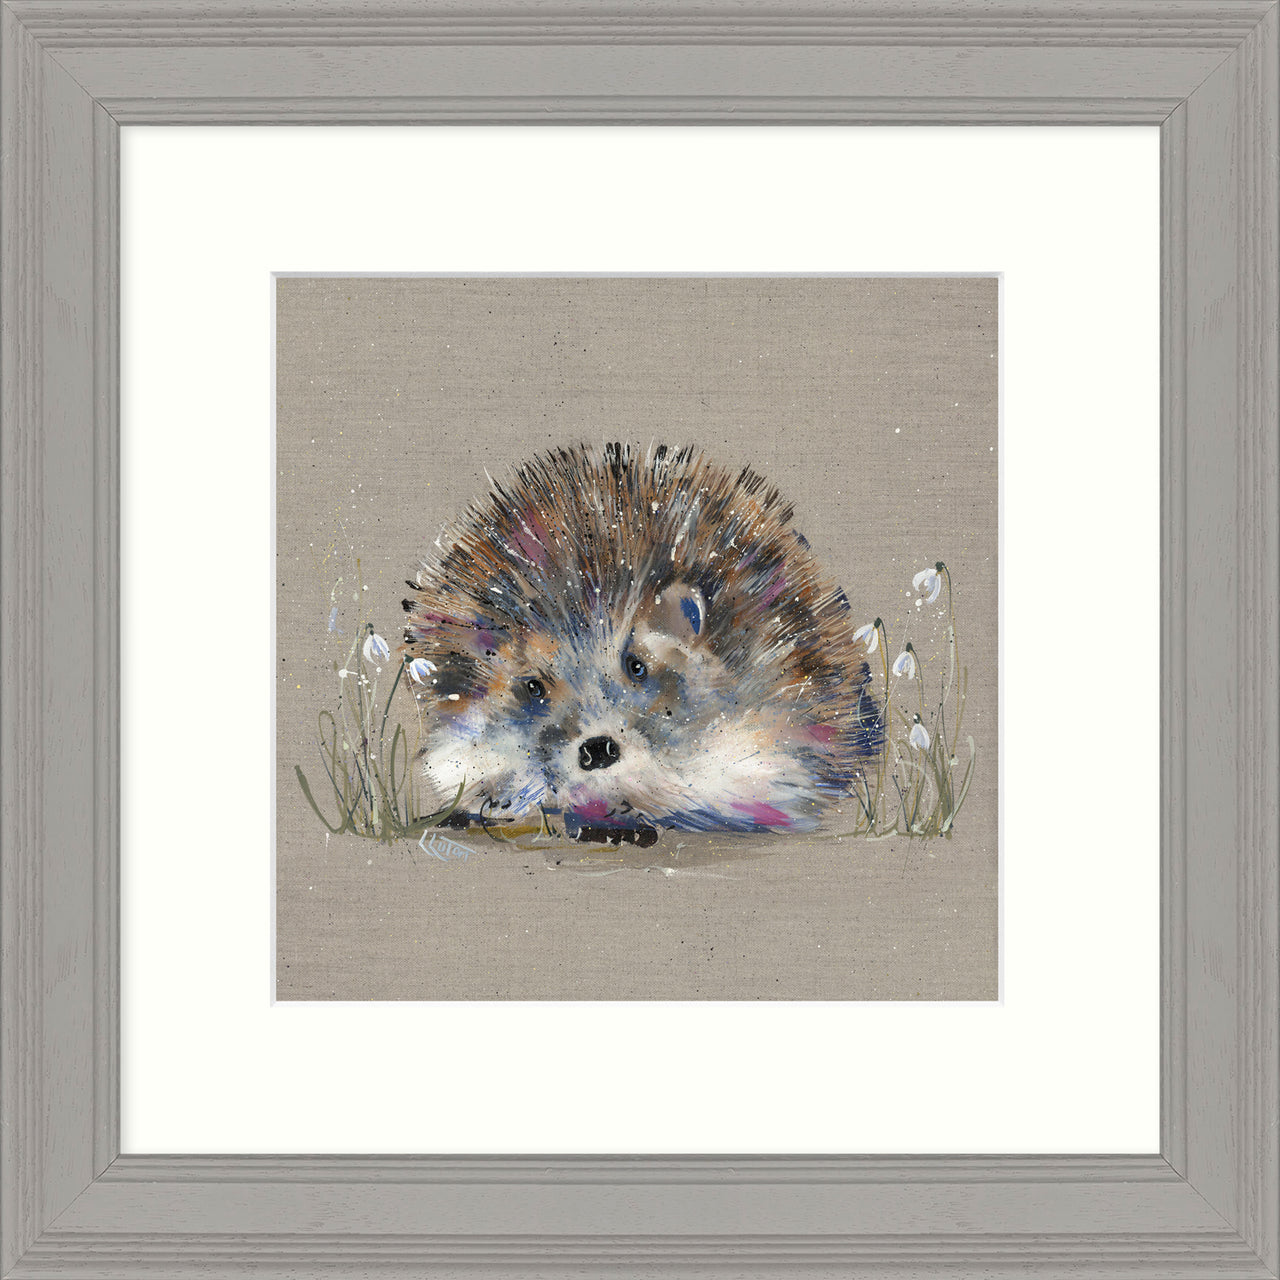 Artko 'Hedgehog and Snowdrops' Picture